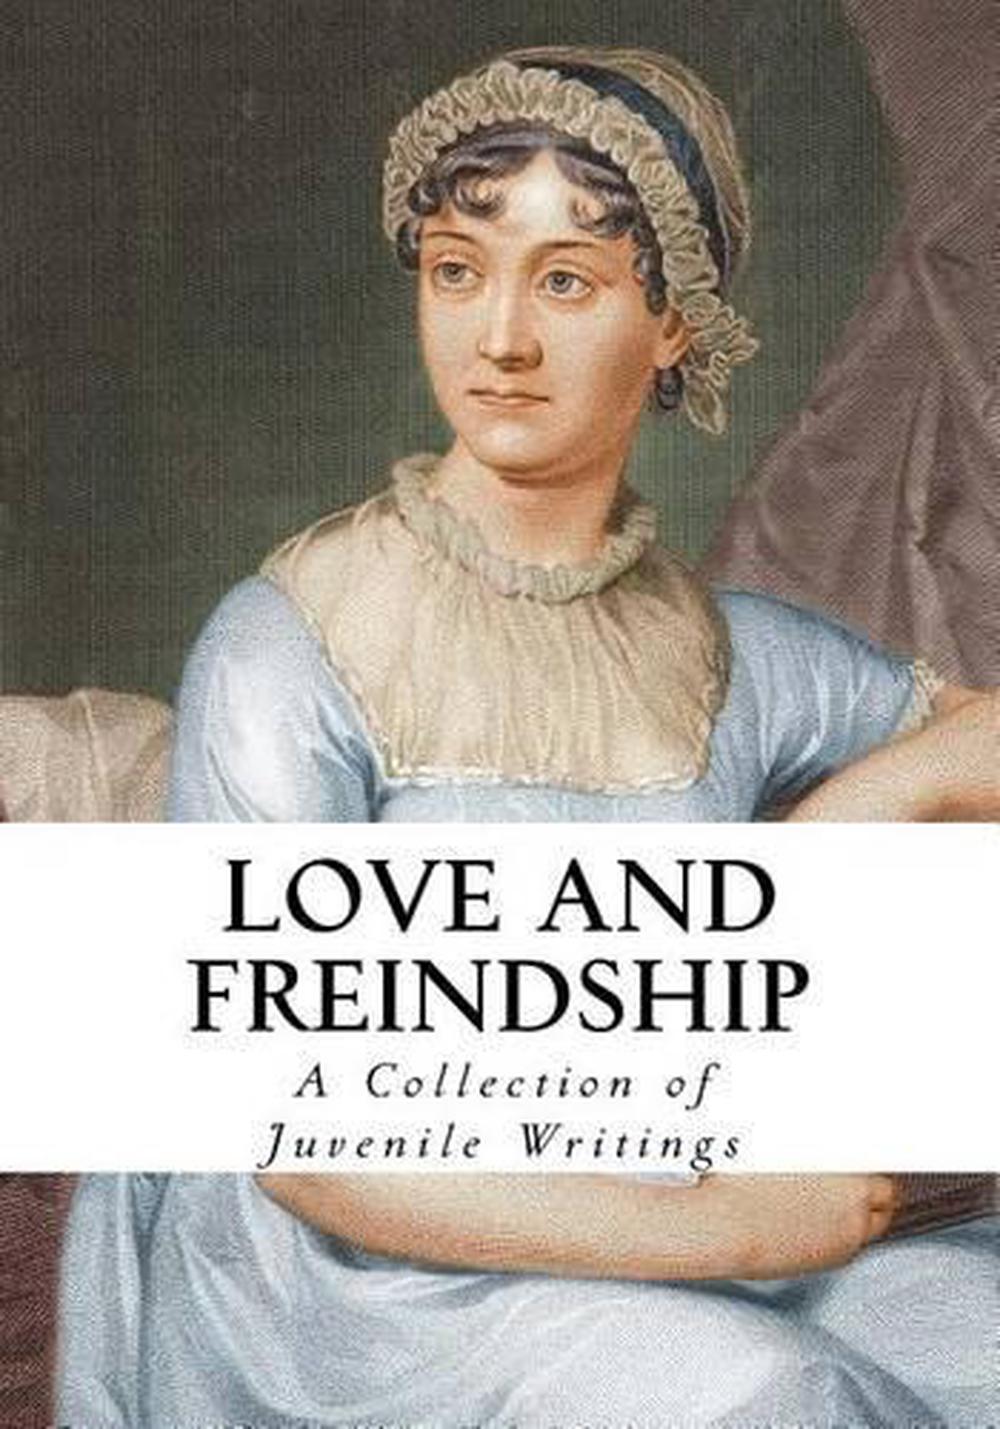 summary of love and friendship by jane austen